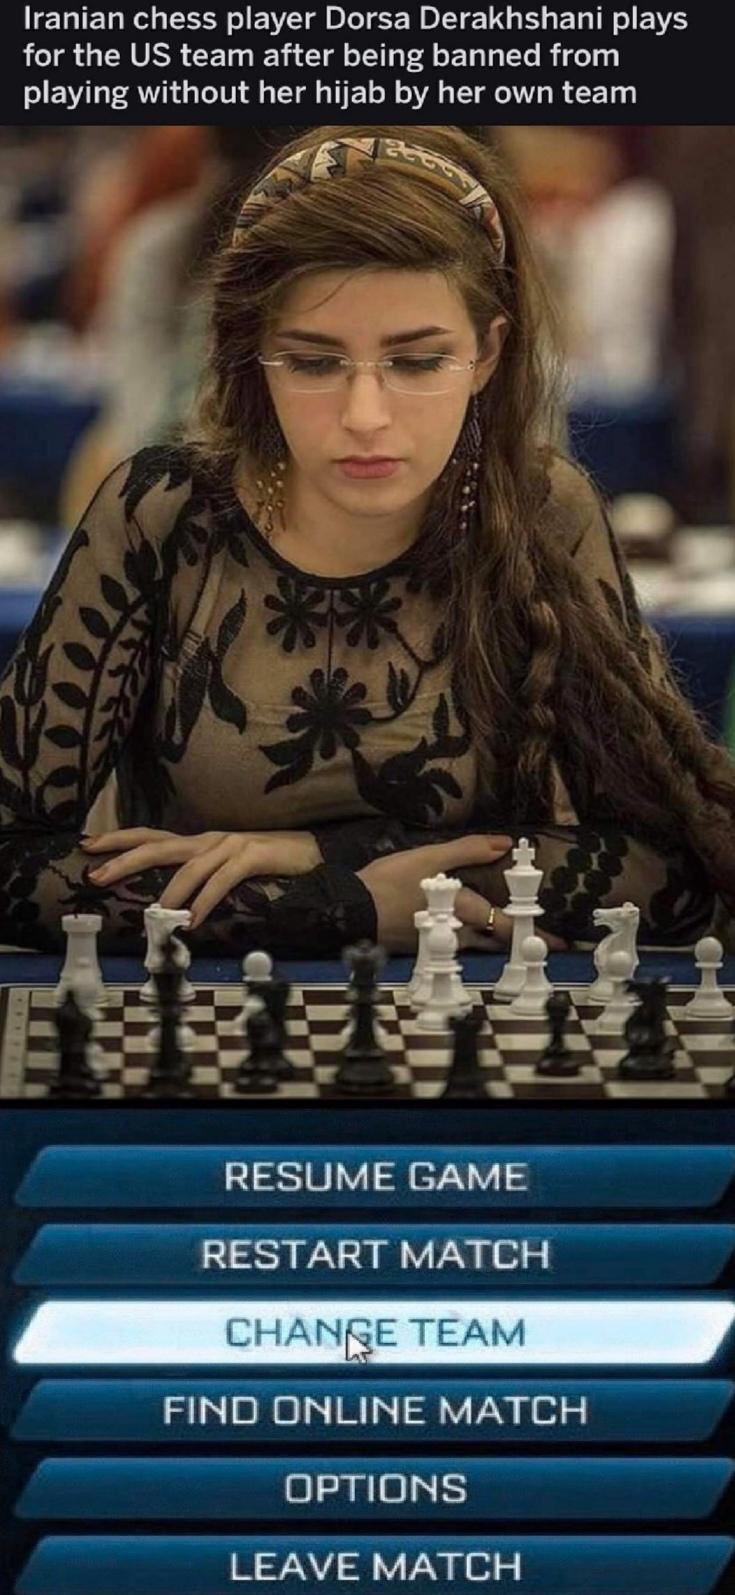 dorsa derakhshani - Iranian chess player Dorsa Derakhshani plays for the Us team after being banned from playing without her hijab by her own team Resume Game Restart Match Change Team Find Online Match Options Leave Match